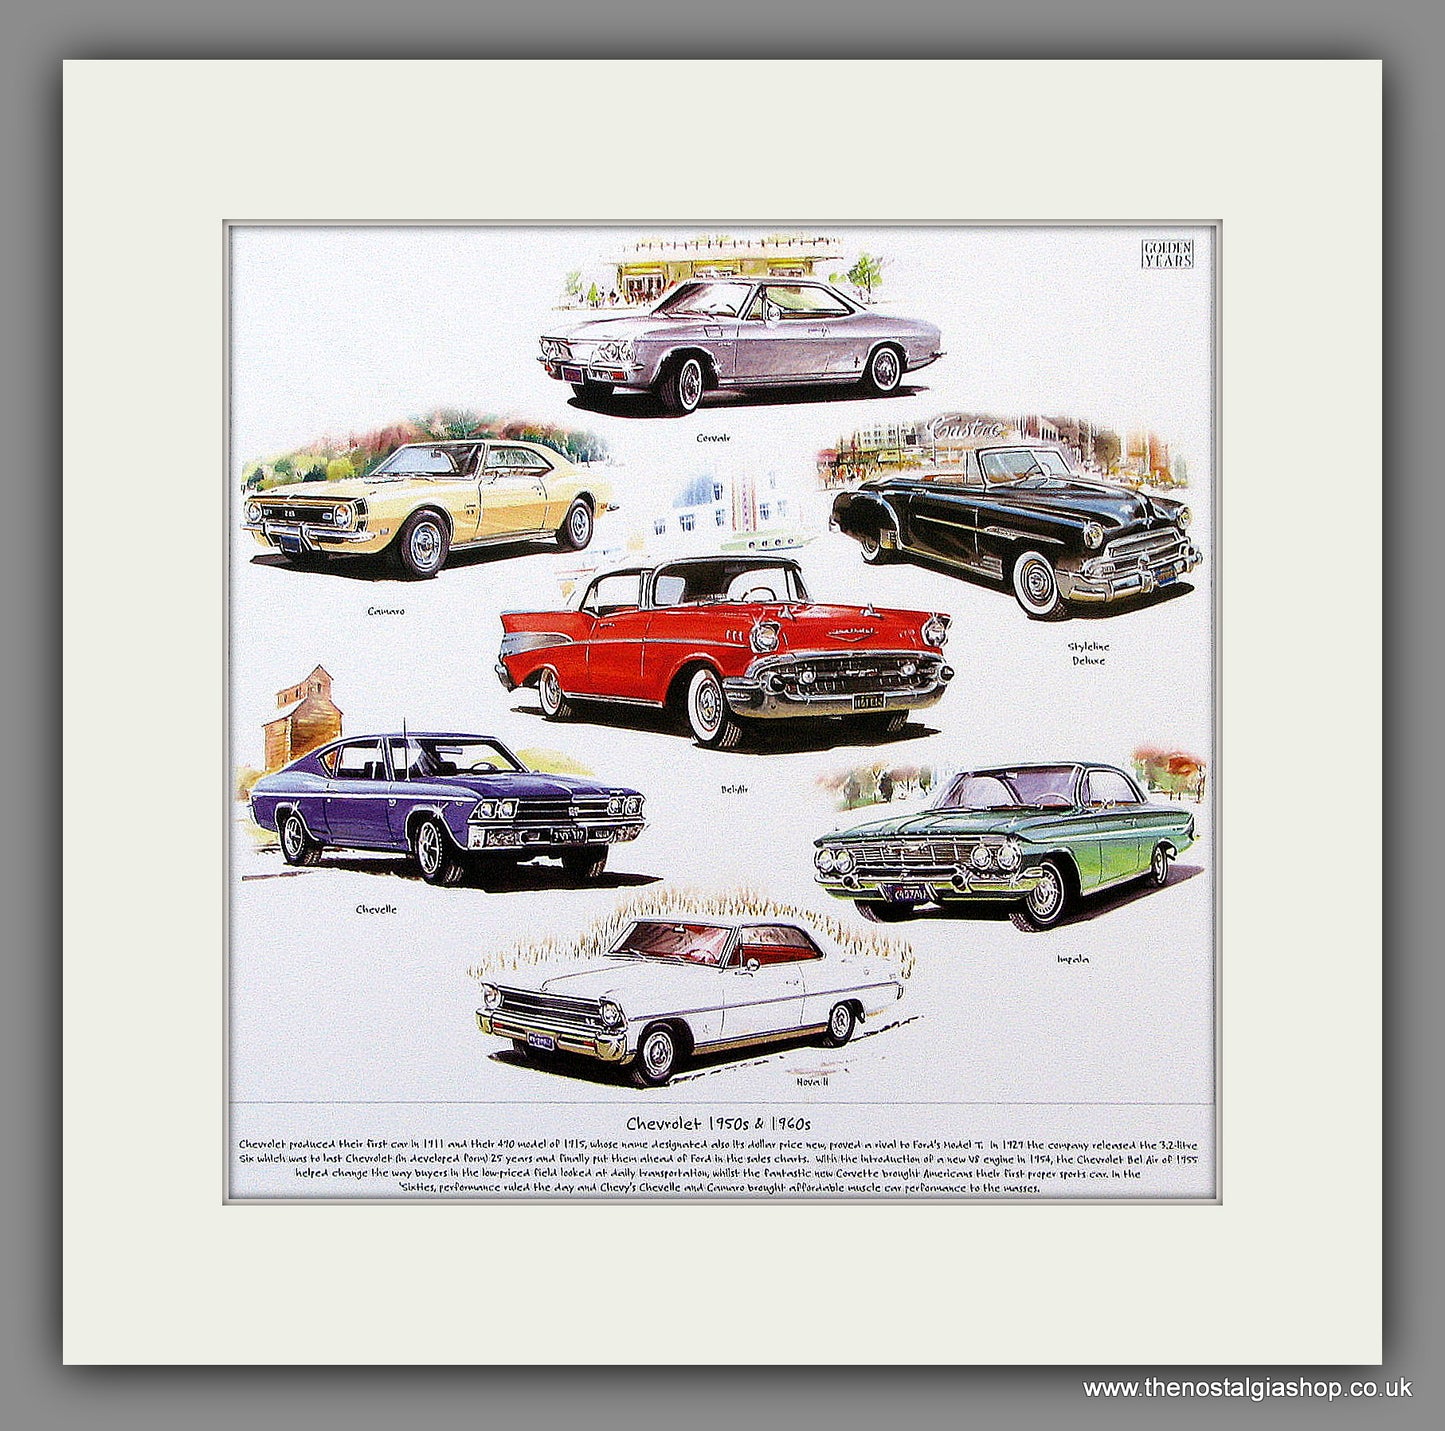 Chevrolet 1950's & 1960's. Mounted Print.